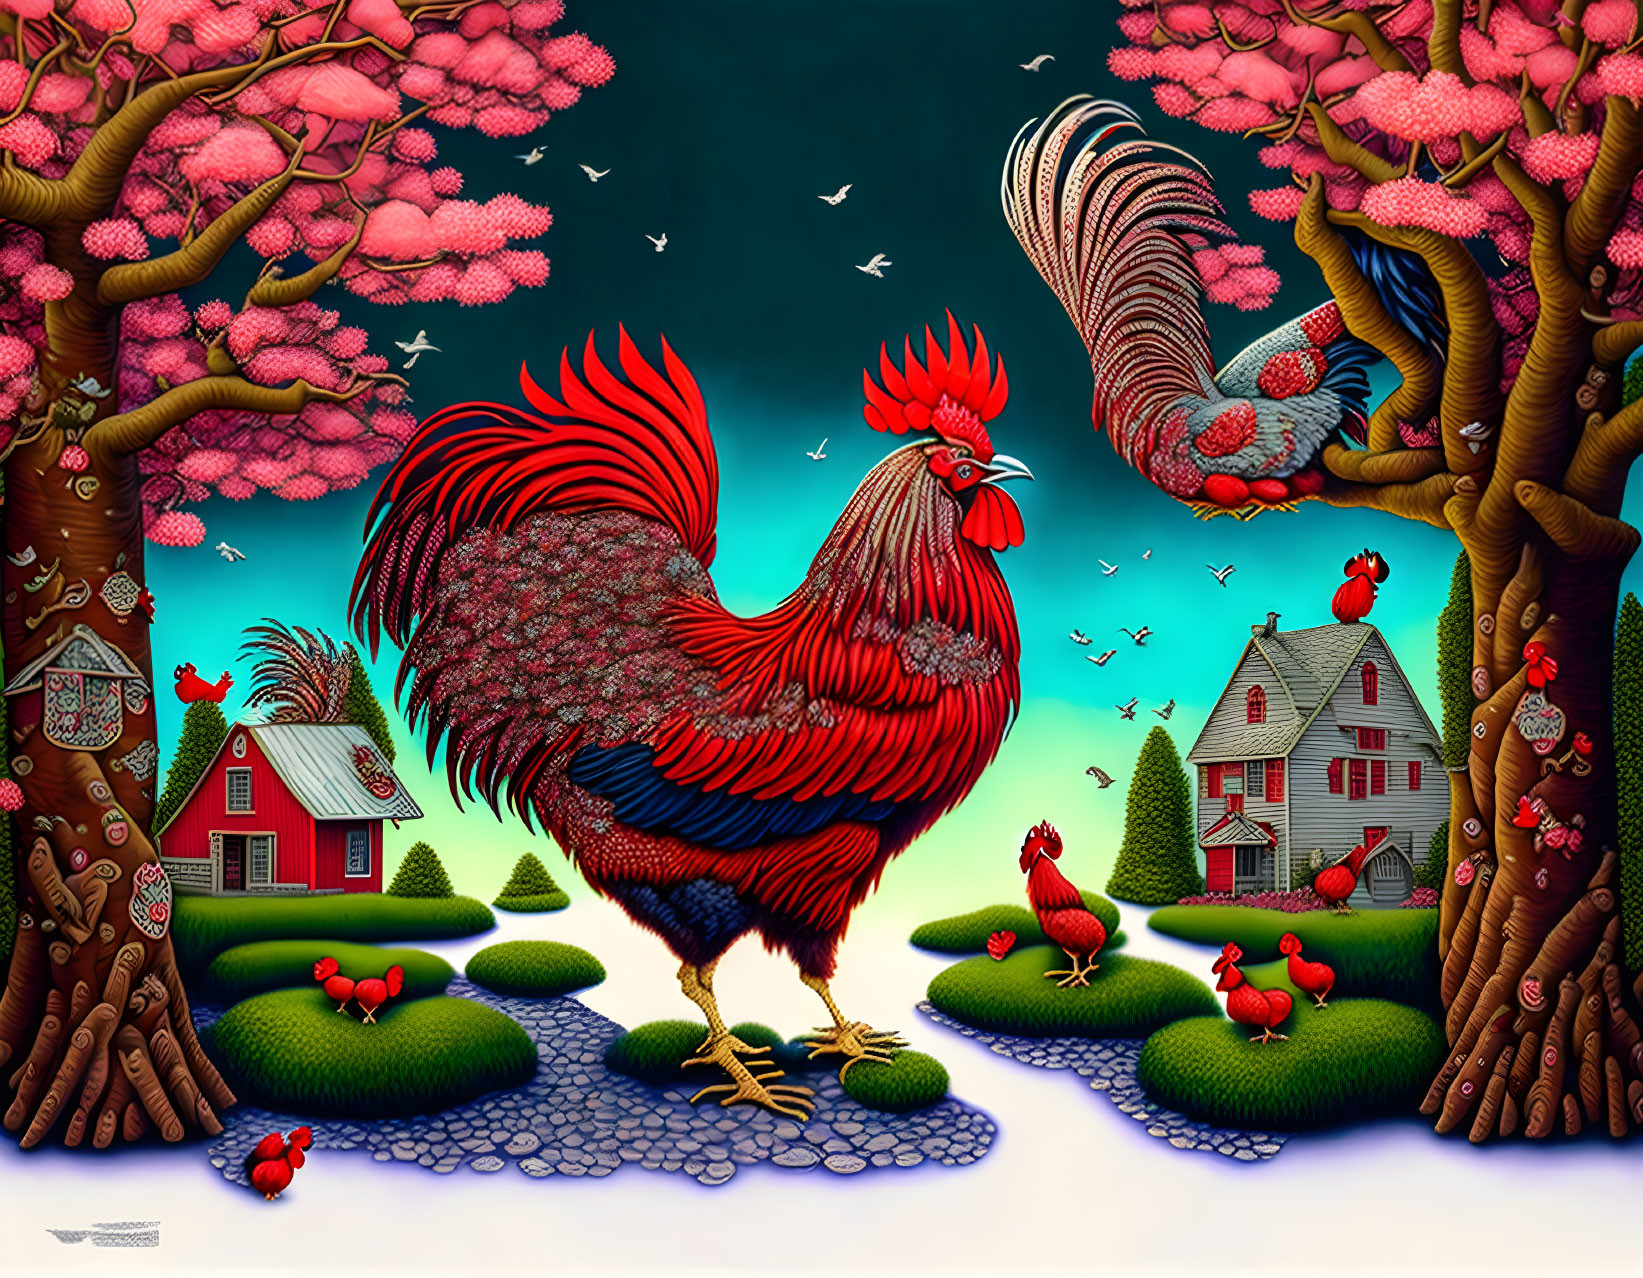 Red cherry tree, rooster, chickens. extreme detail